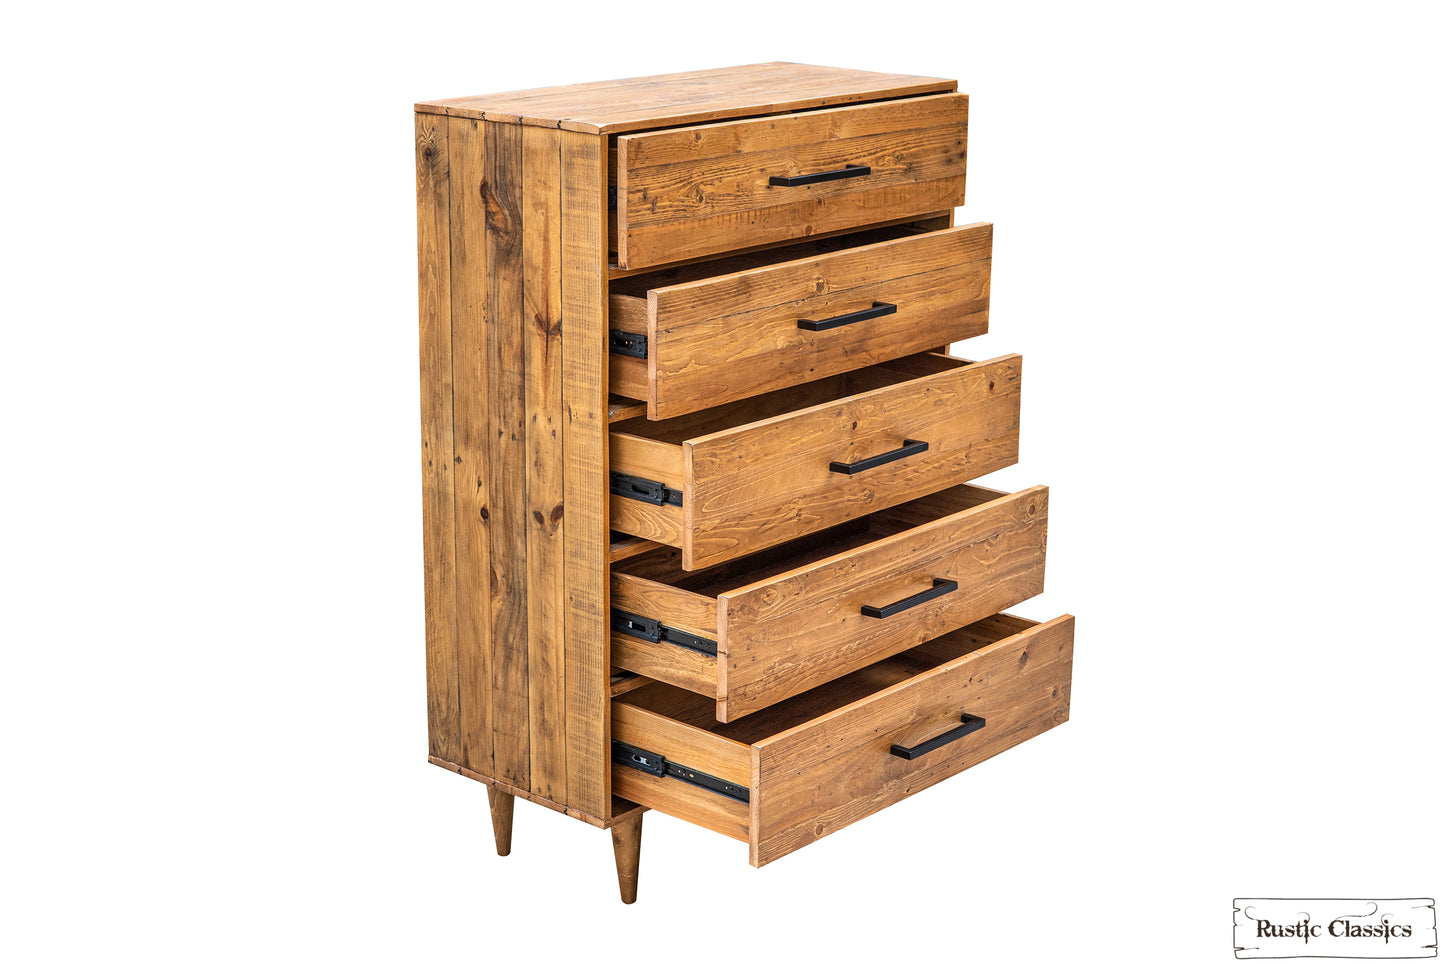 Cypress Reclaimed Wood 5 Drawer Chest in Spice